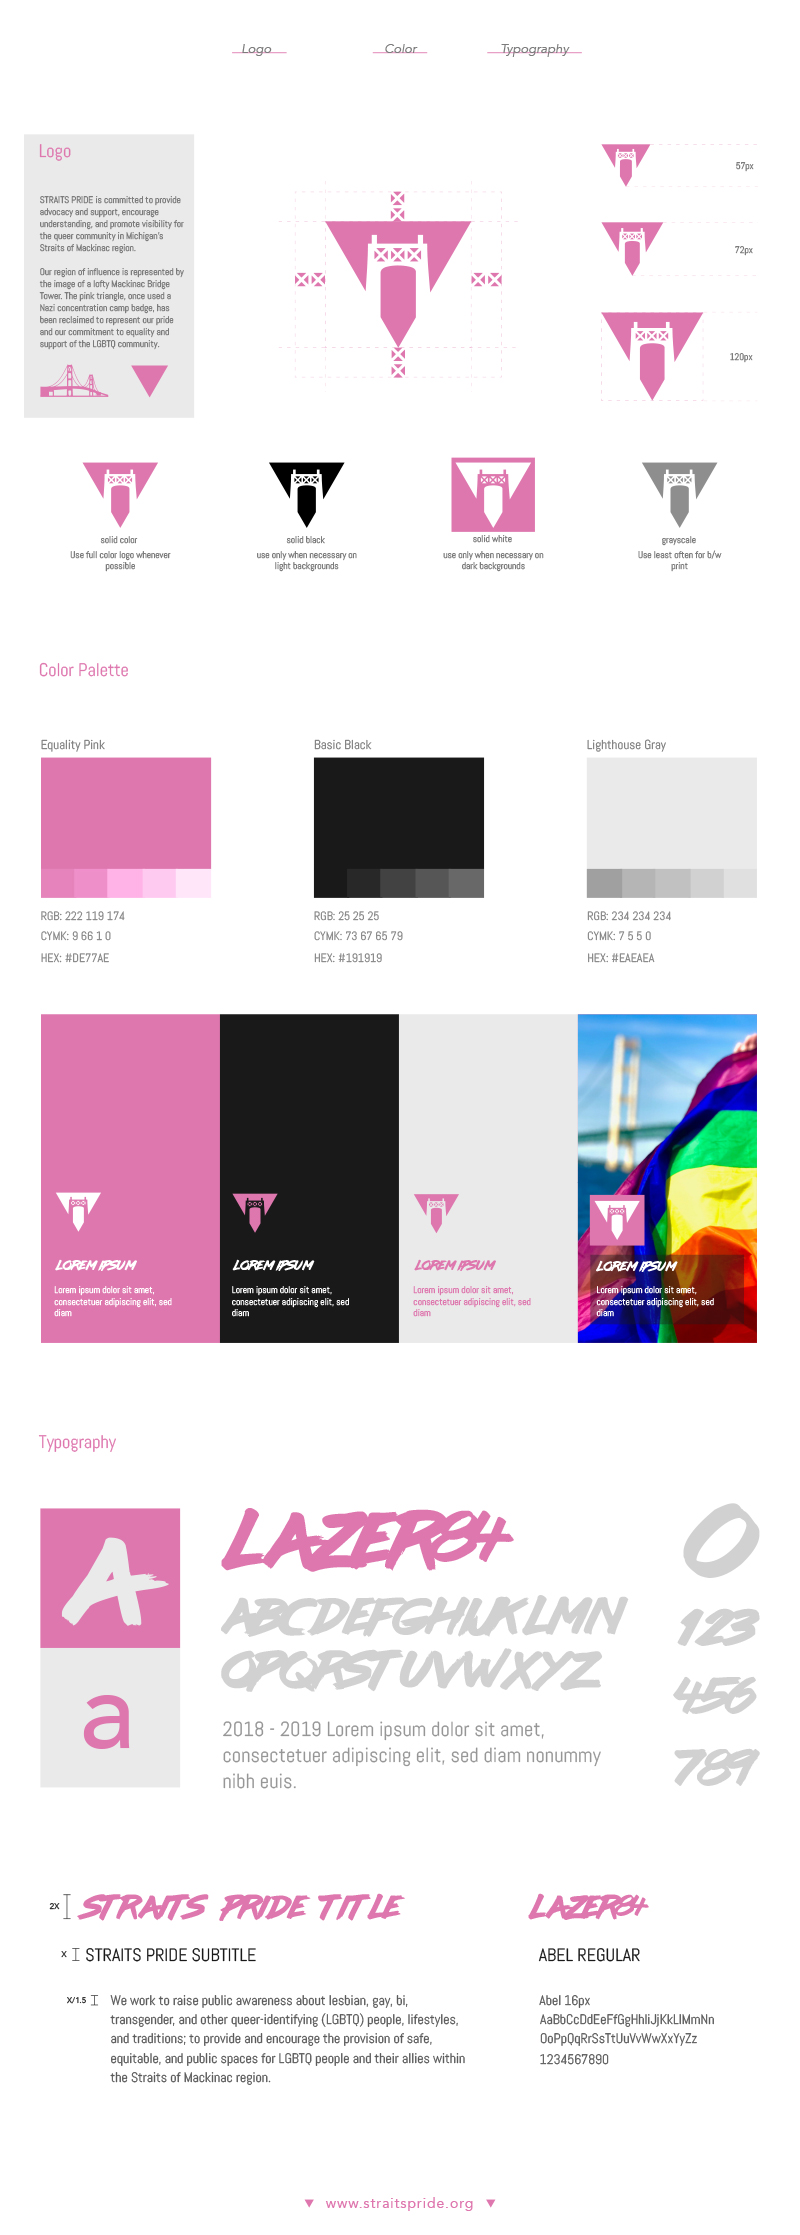 Brand guidelines created for Straits Pride that includes logo use, color pallette and typography